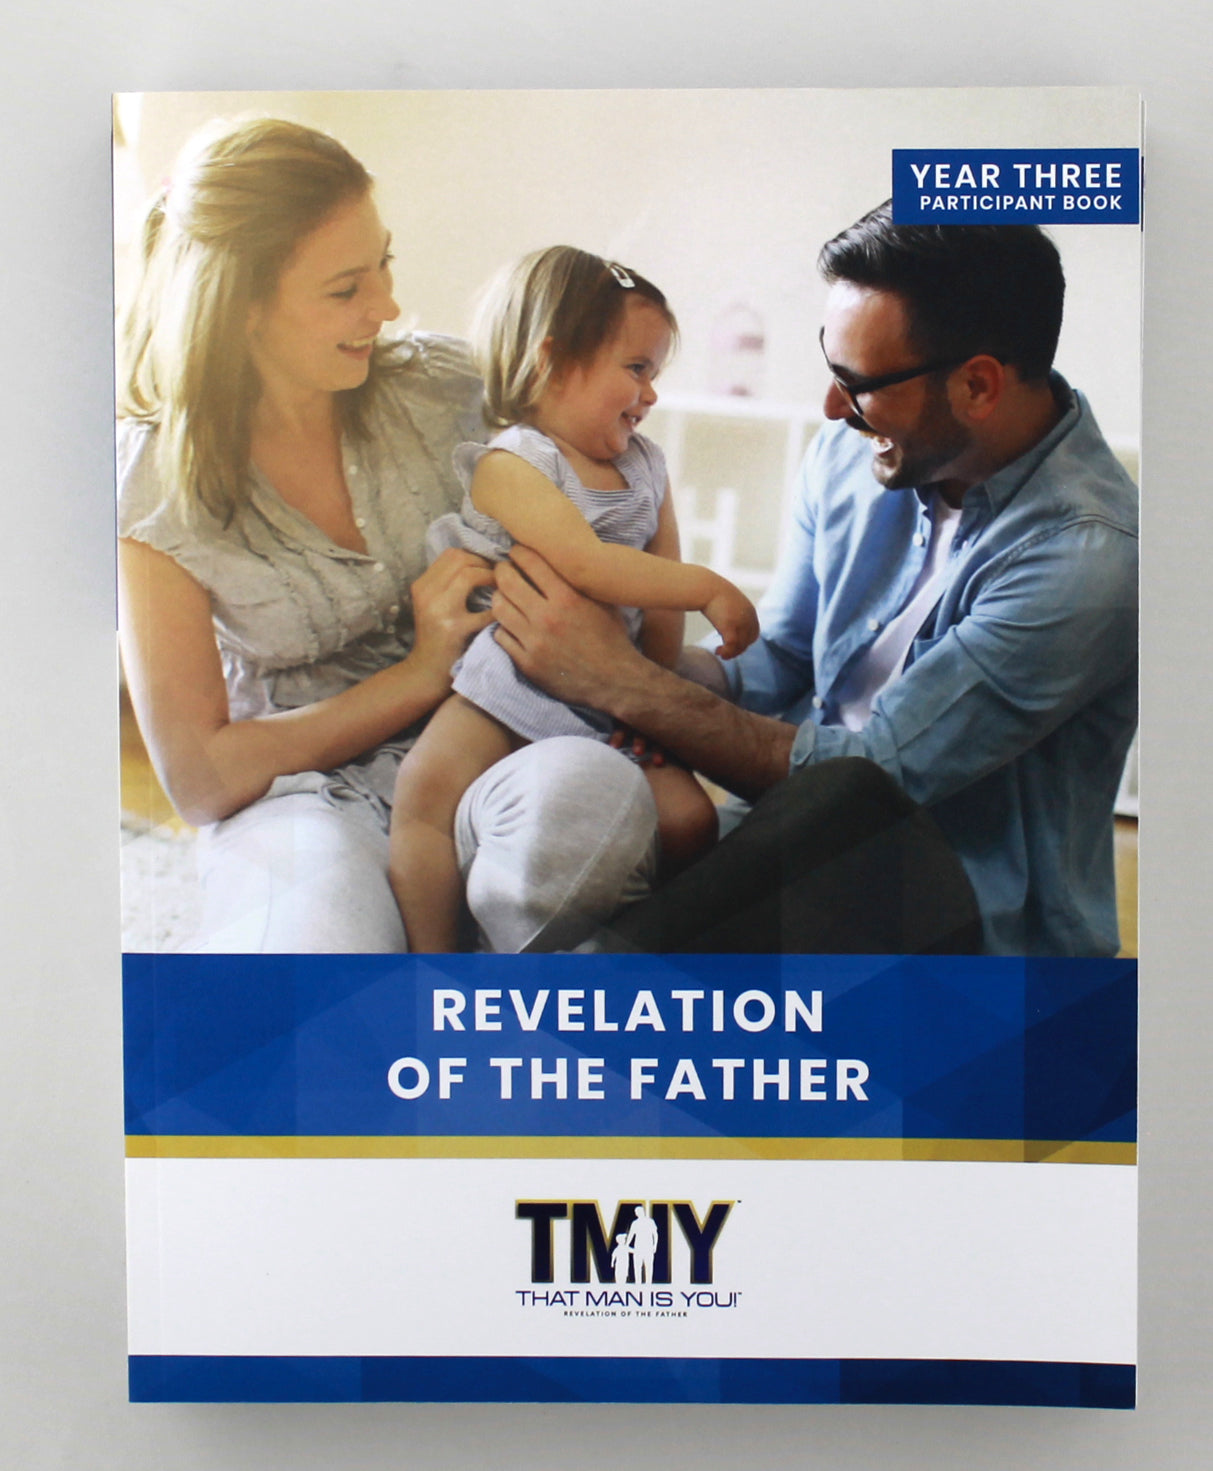 That Man is You! Participant Book - Revelation of the Father